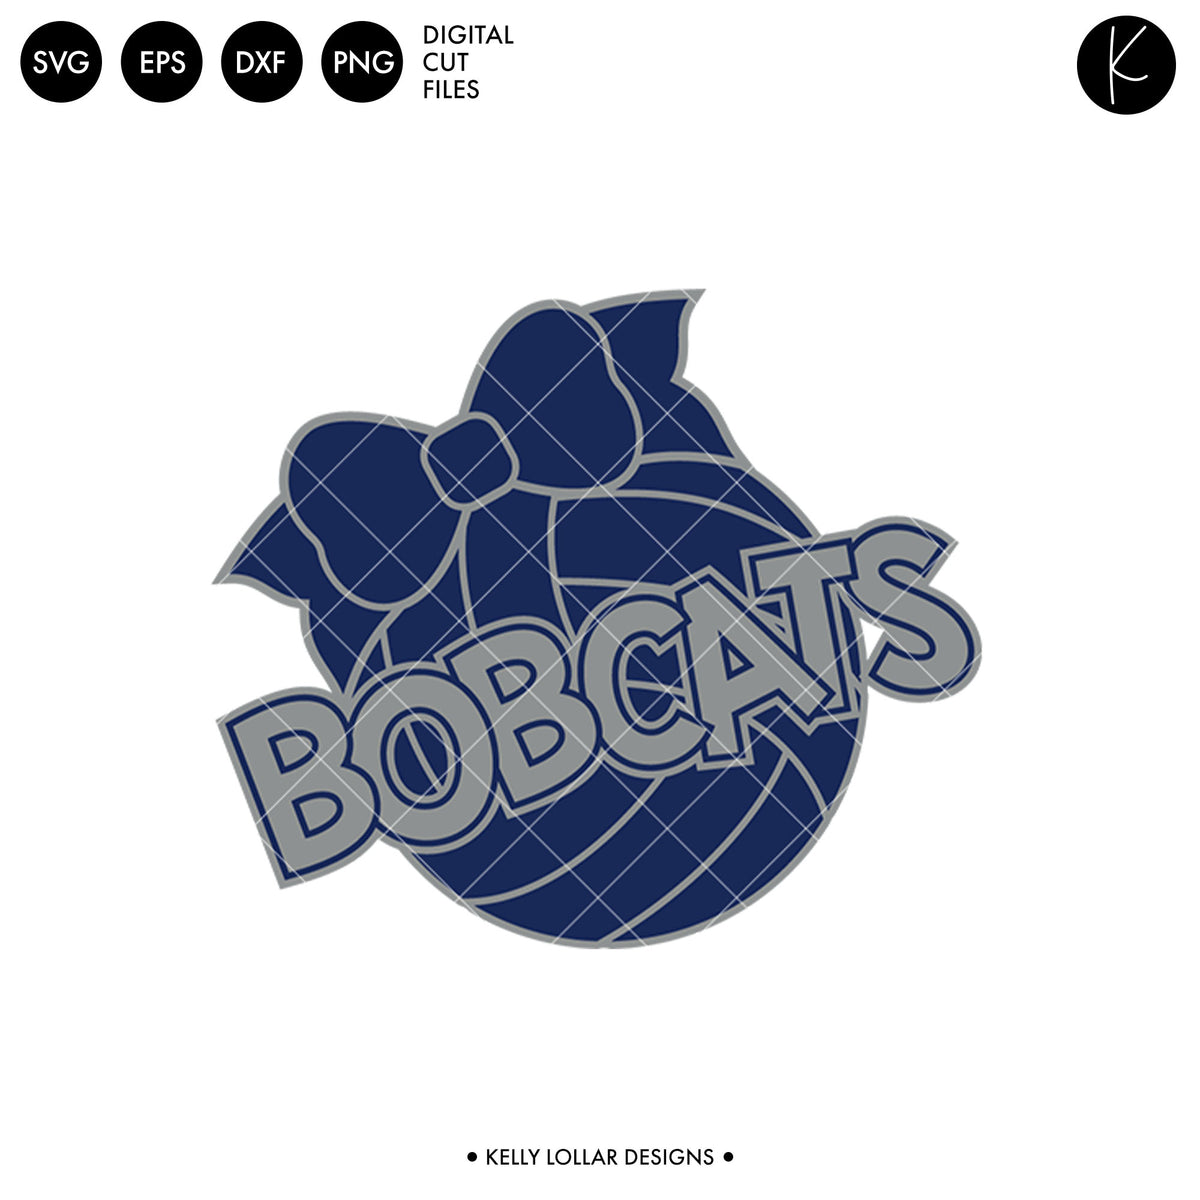 Bobcats Volleyball Bundle | SVG DXF EPS PNG Cut Files